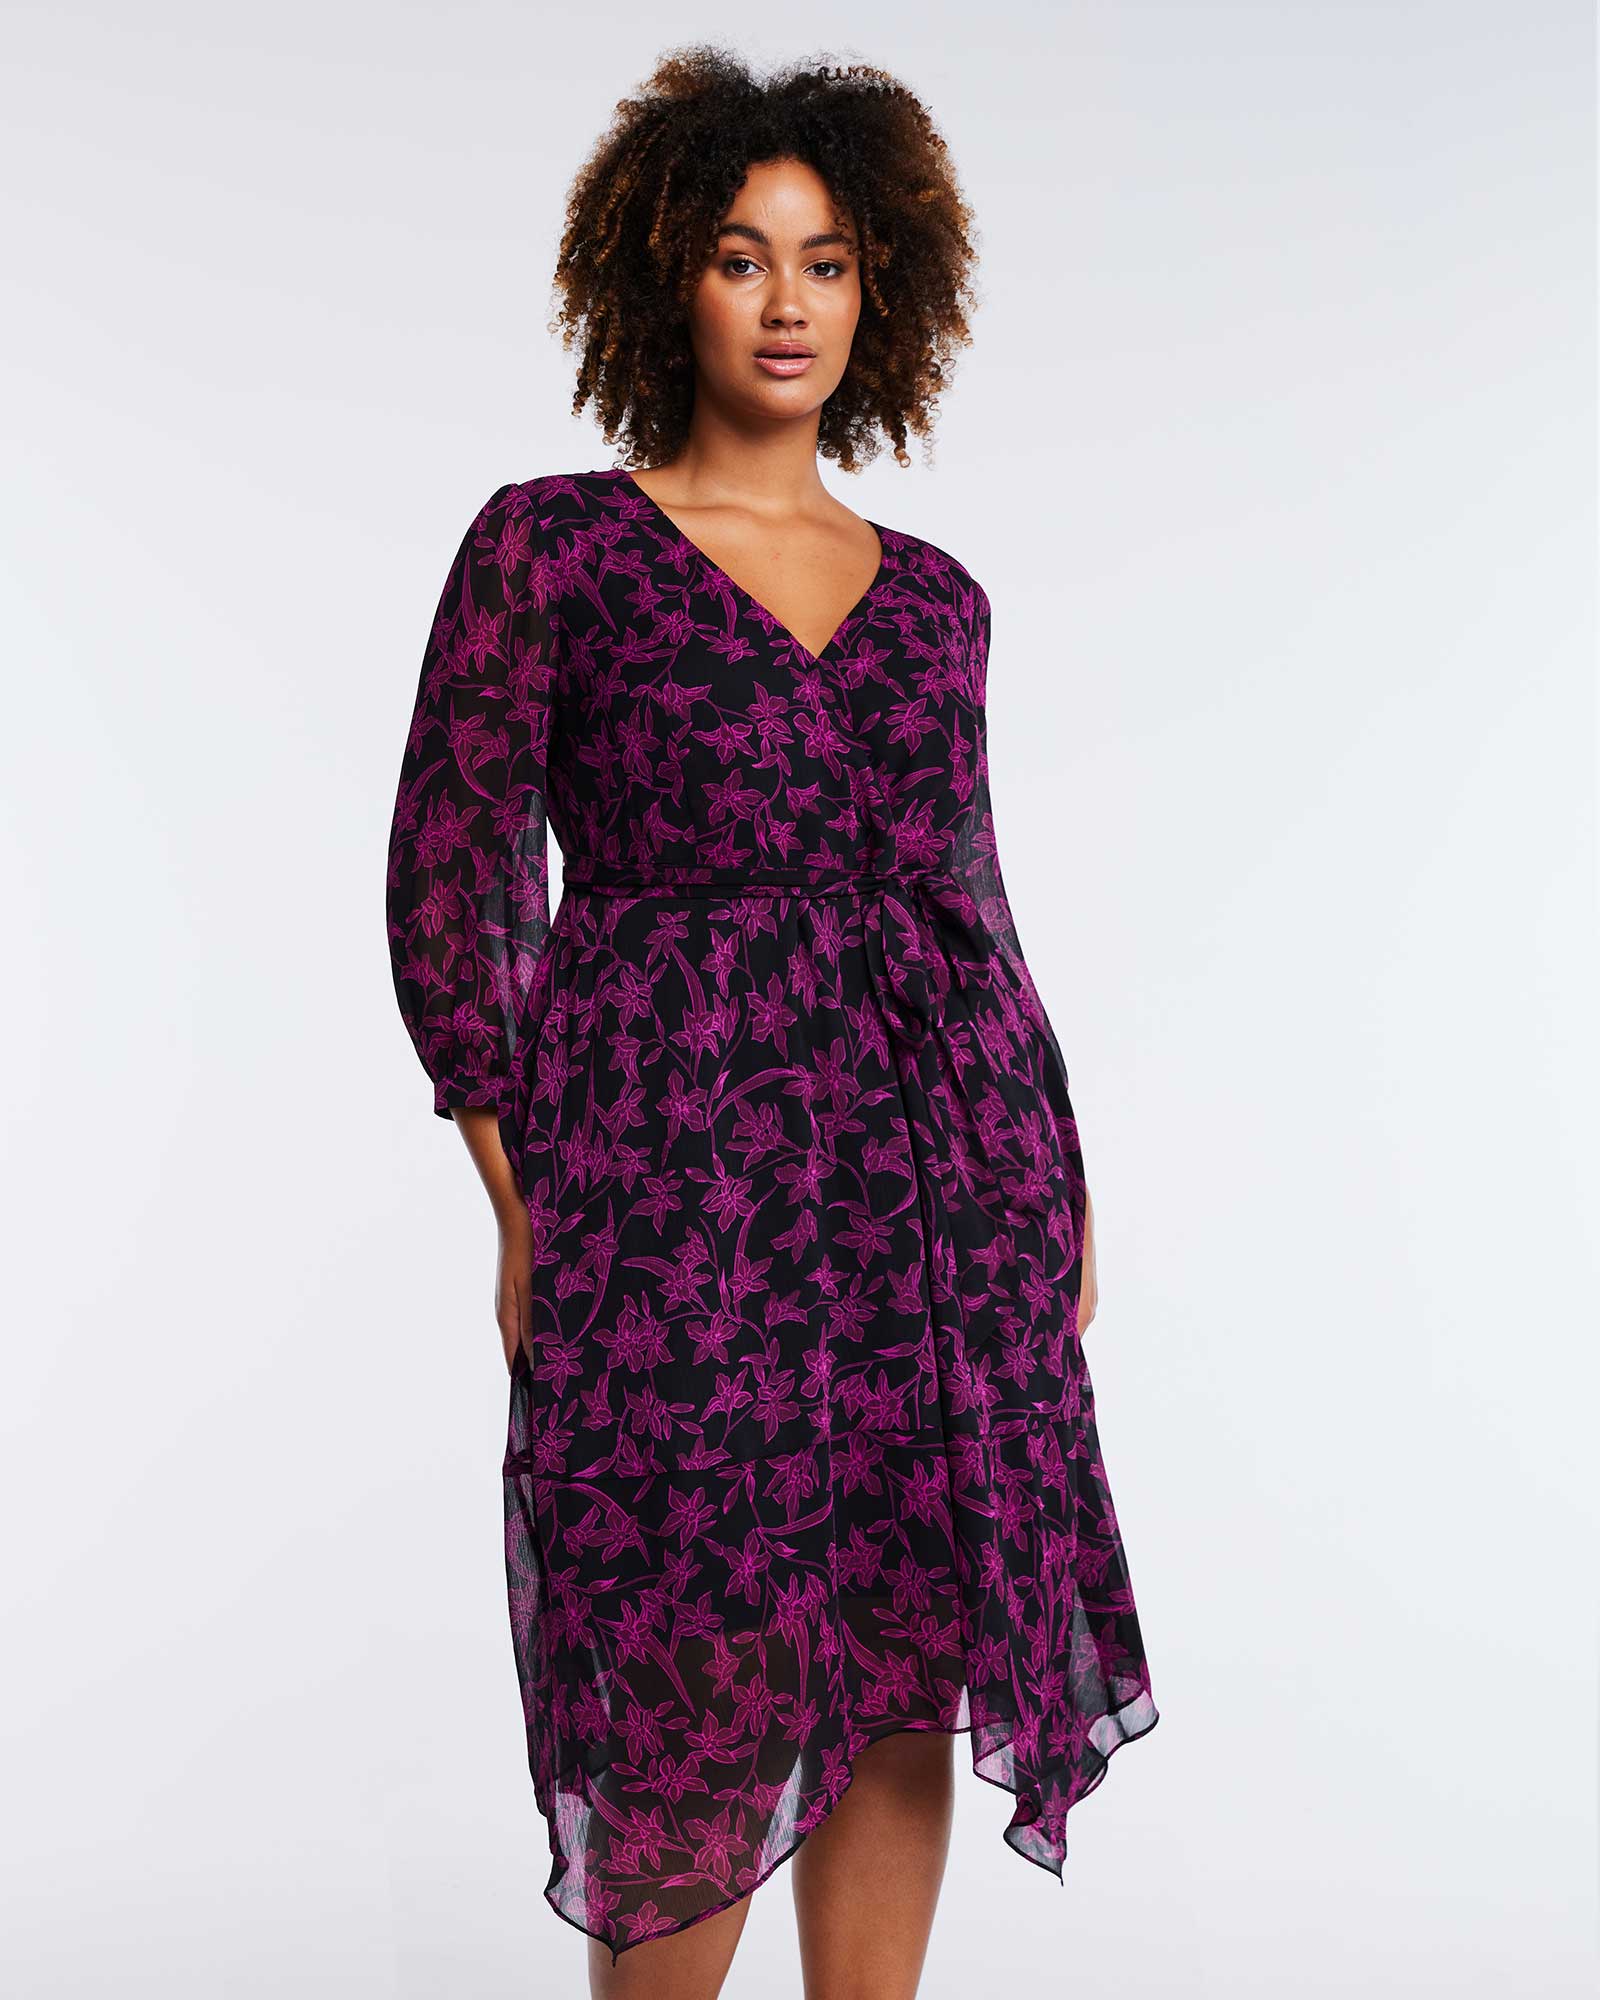 A comfortable and elegant plus size woman wearing a Boysenberry Bloom Black Pink Floral Midi Dress in purple and black.